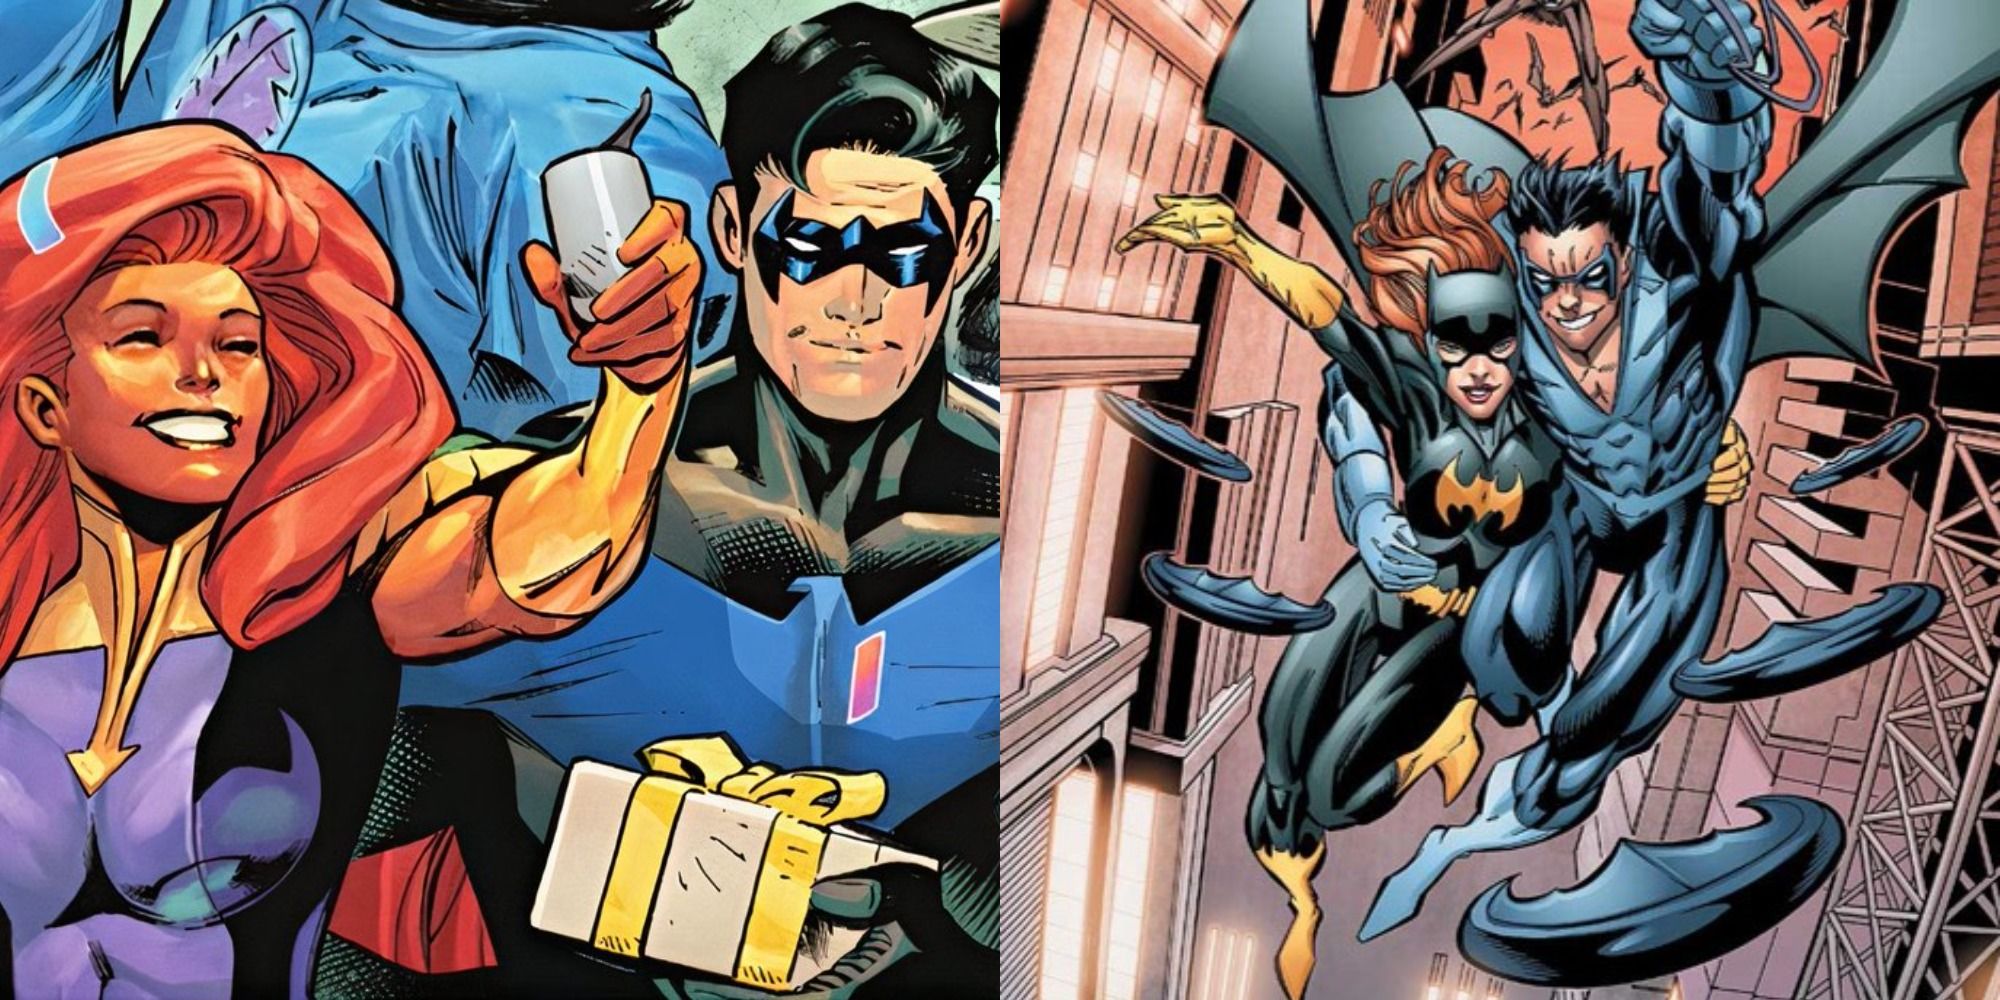 Split image showing Nightwing with Starfire and Batgirl swinging through a city in DC Comics.